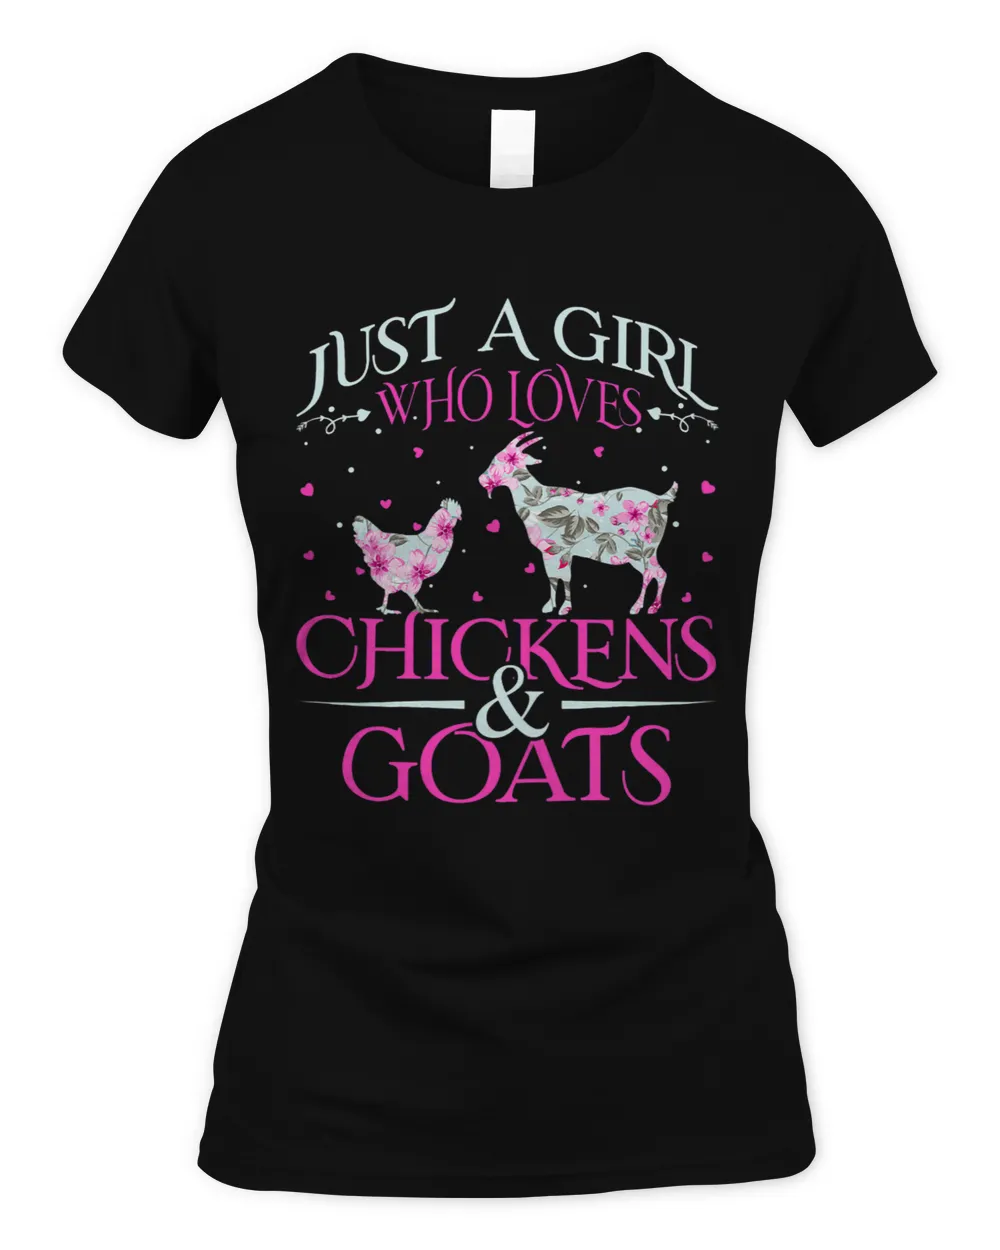 Funny Goat Just A Girl Who Loves Chickens 2Goats 2Funny Girls Gift